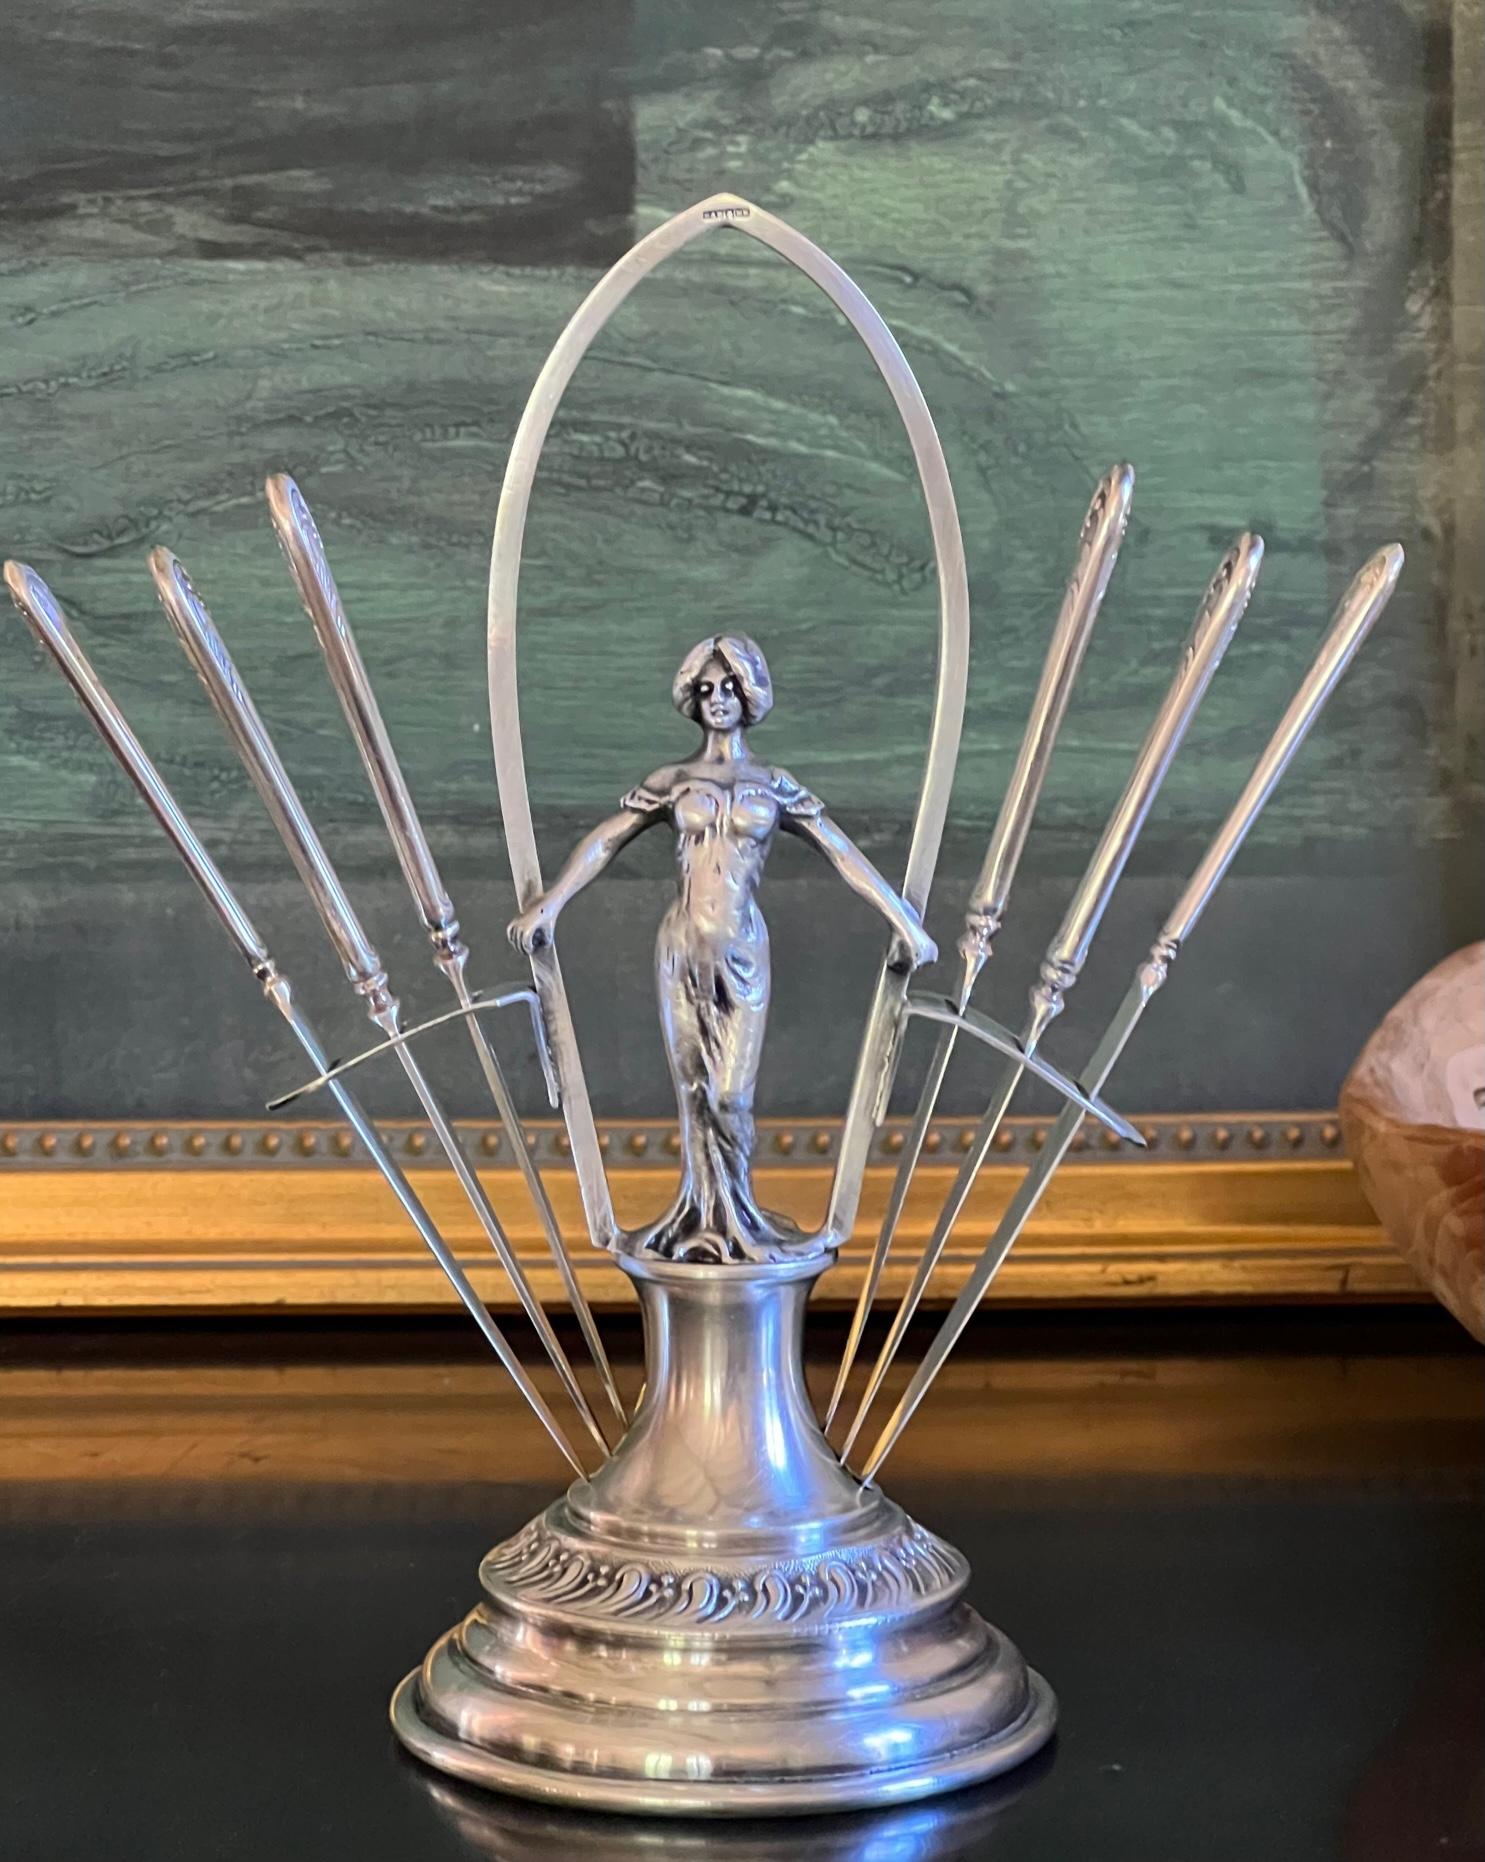 Art Nouveau set of fruit knives made by GAB (Guldsmeds Aktie Bolet) in Sweden sometime around 1900. The stand is a figure of a woman with her arms outstretched with three knives on each side.

Stamped on the tip of the stand is  GAB  MS
Each knife